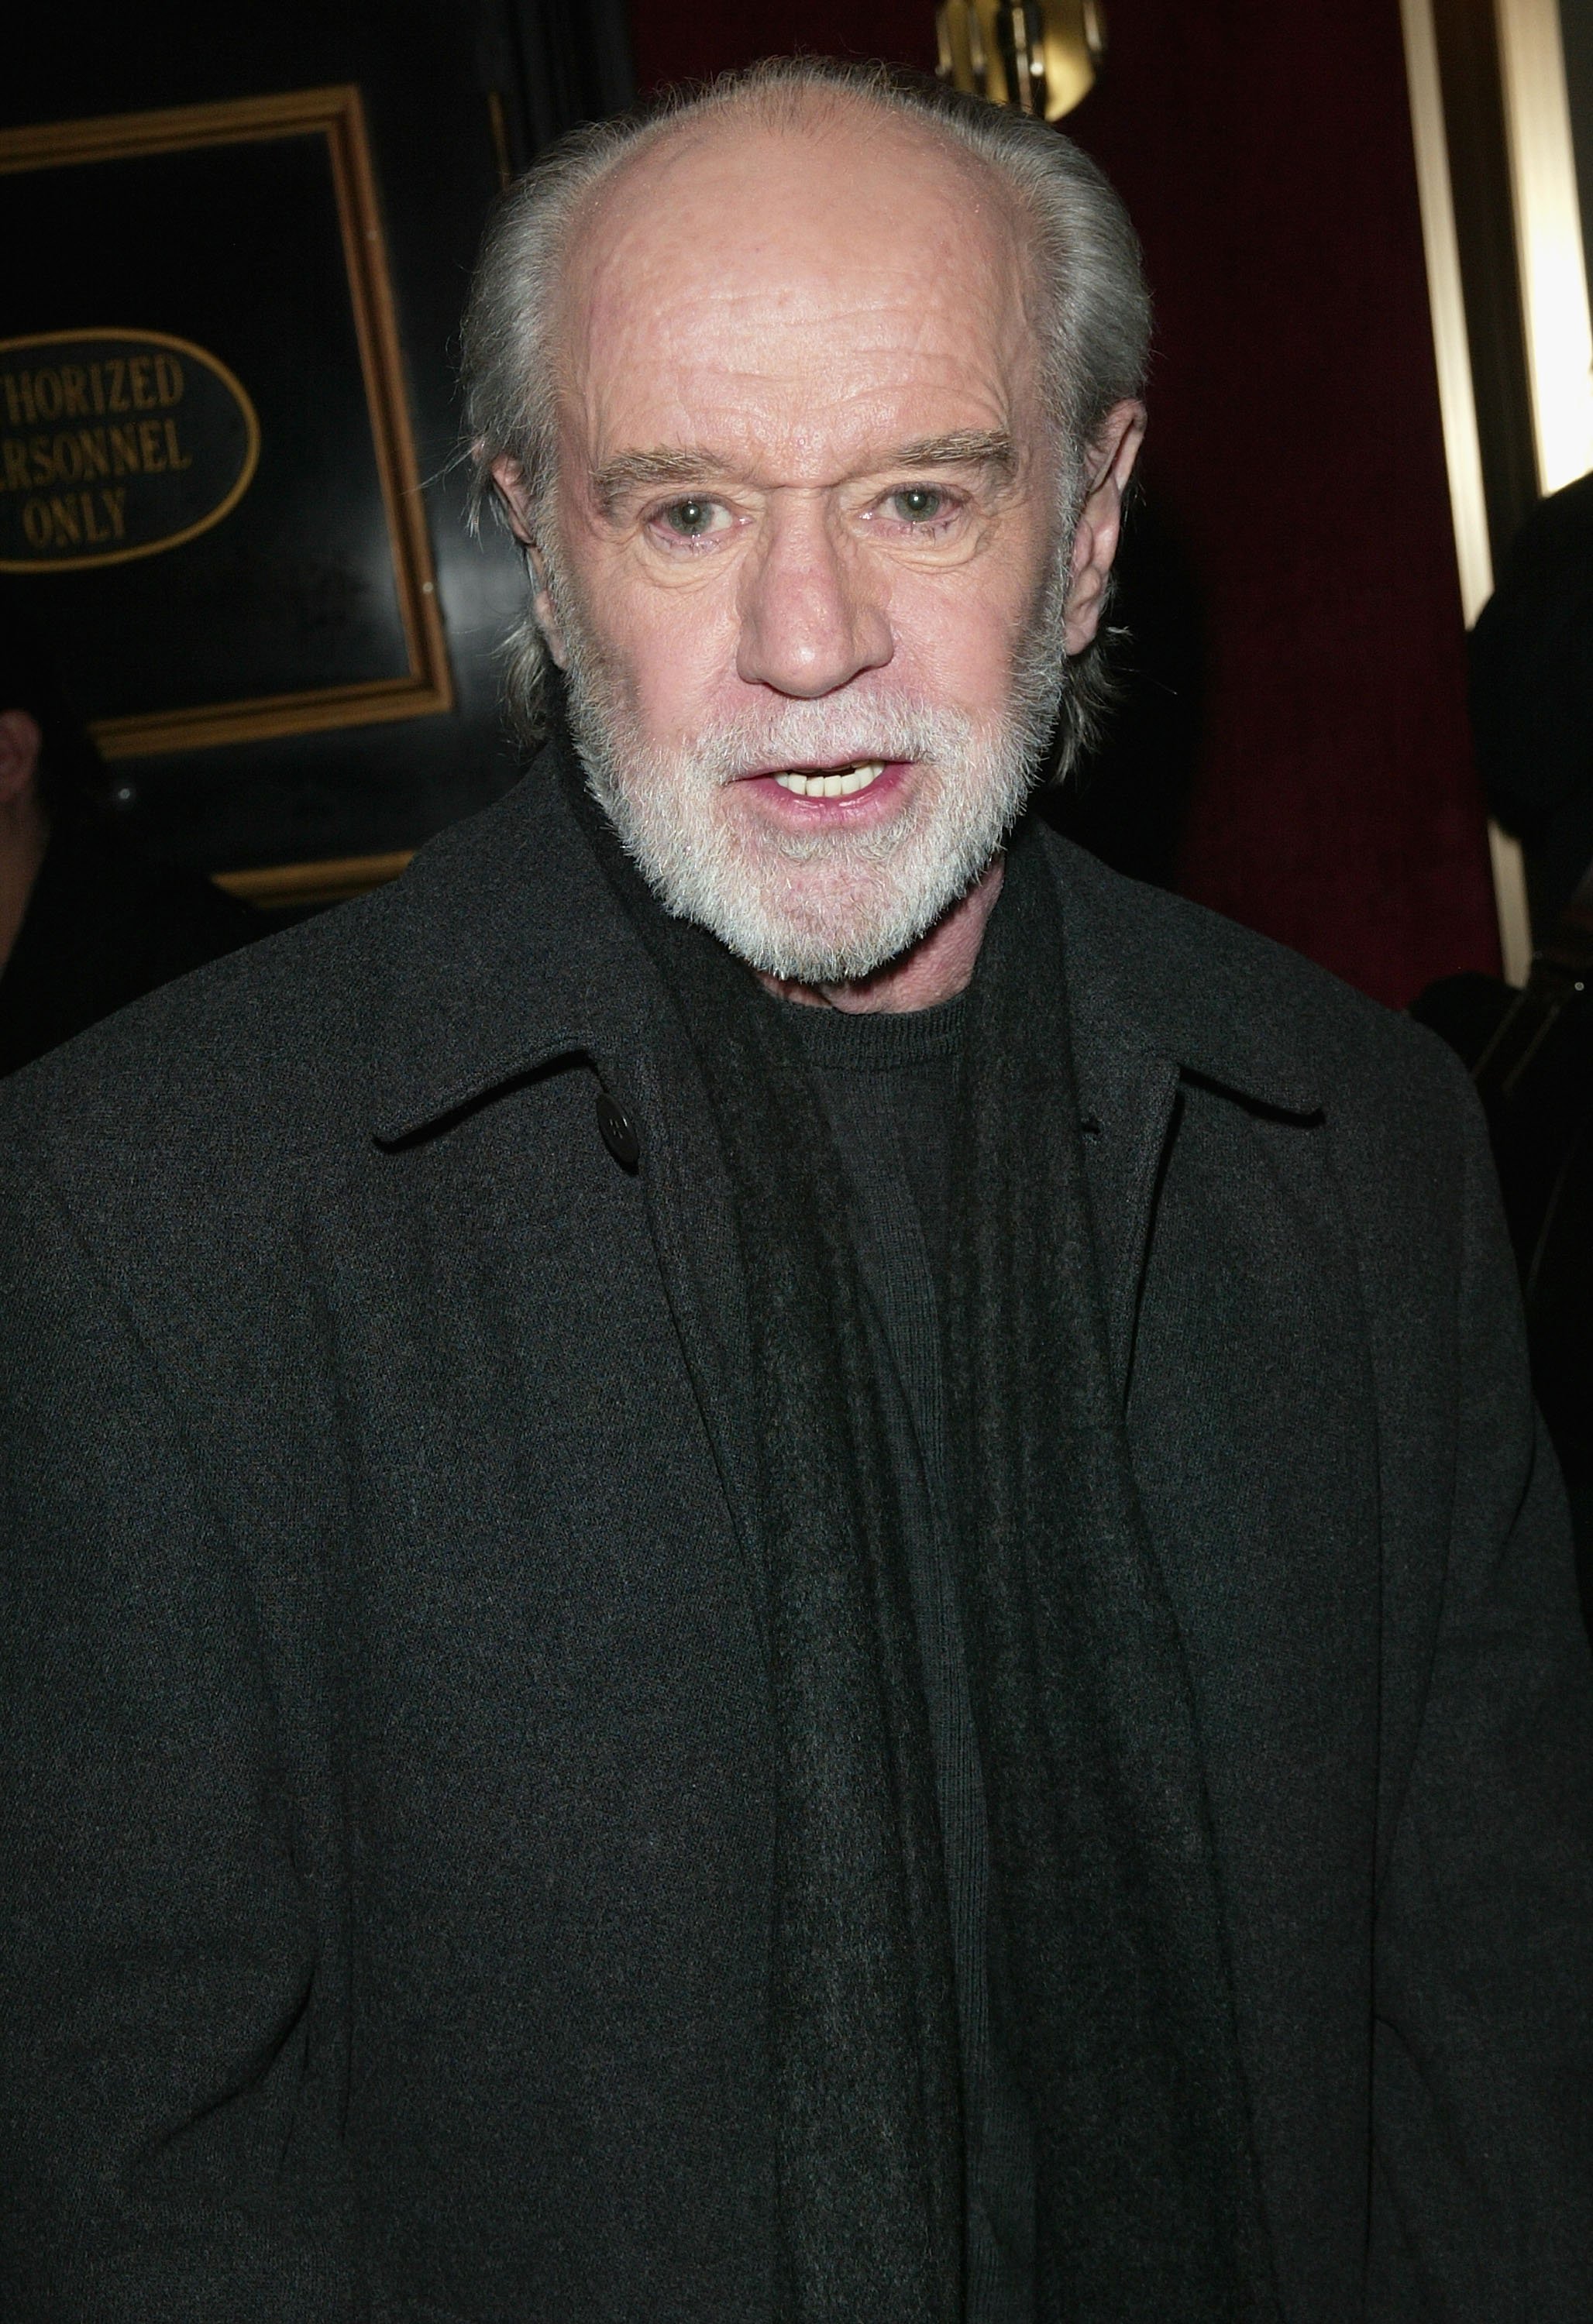 Comedian George Carlin attends the "Jersey Girl" film premiered on March 9, 2004 at the Ziegfeld Theater, in New York City.  |  Source: Getty Images